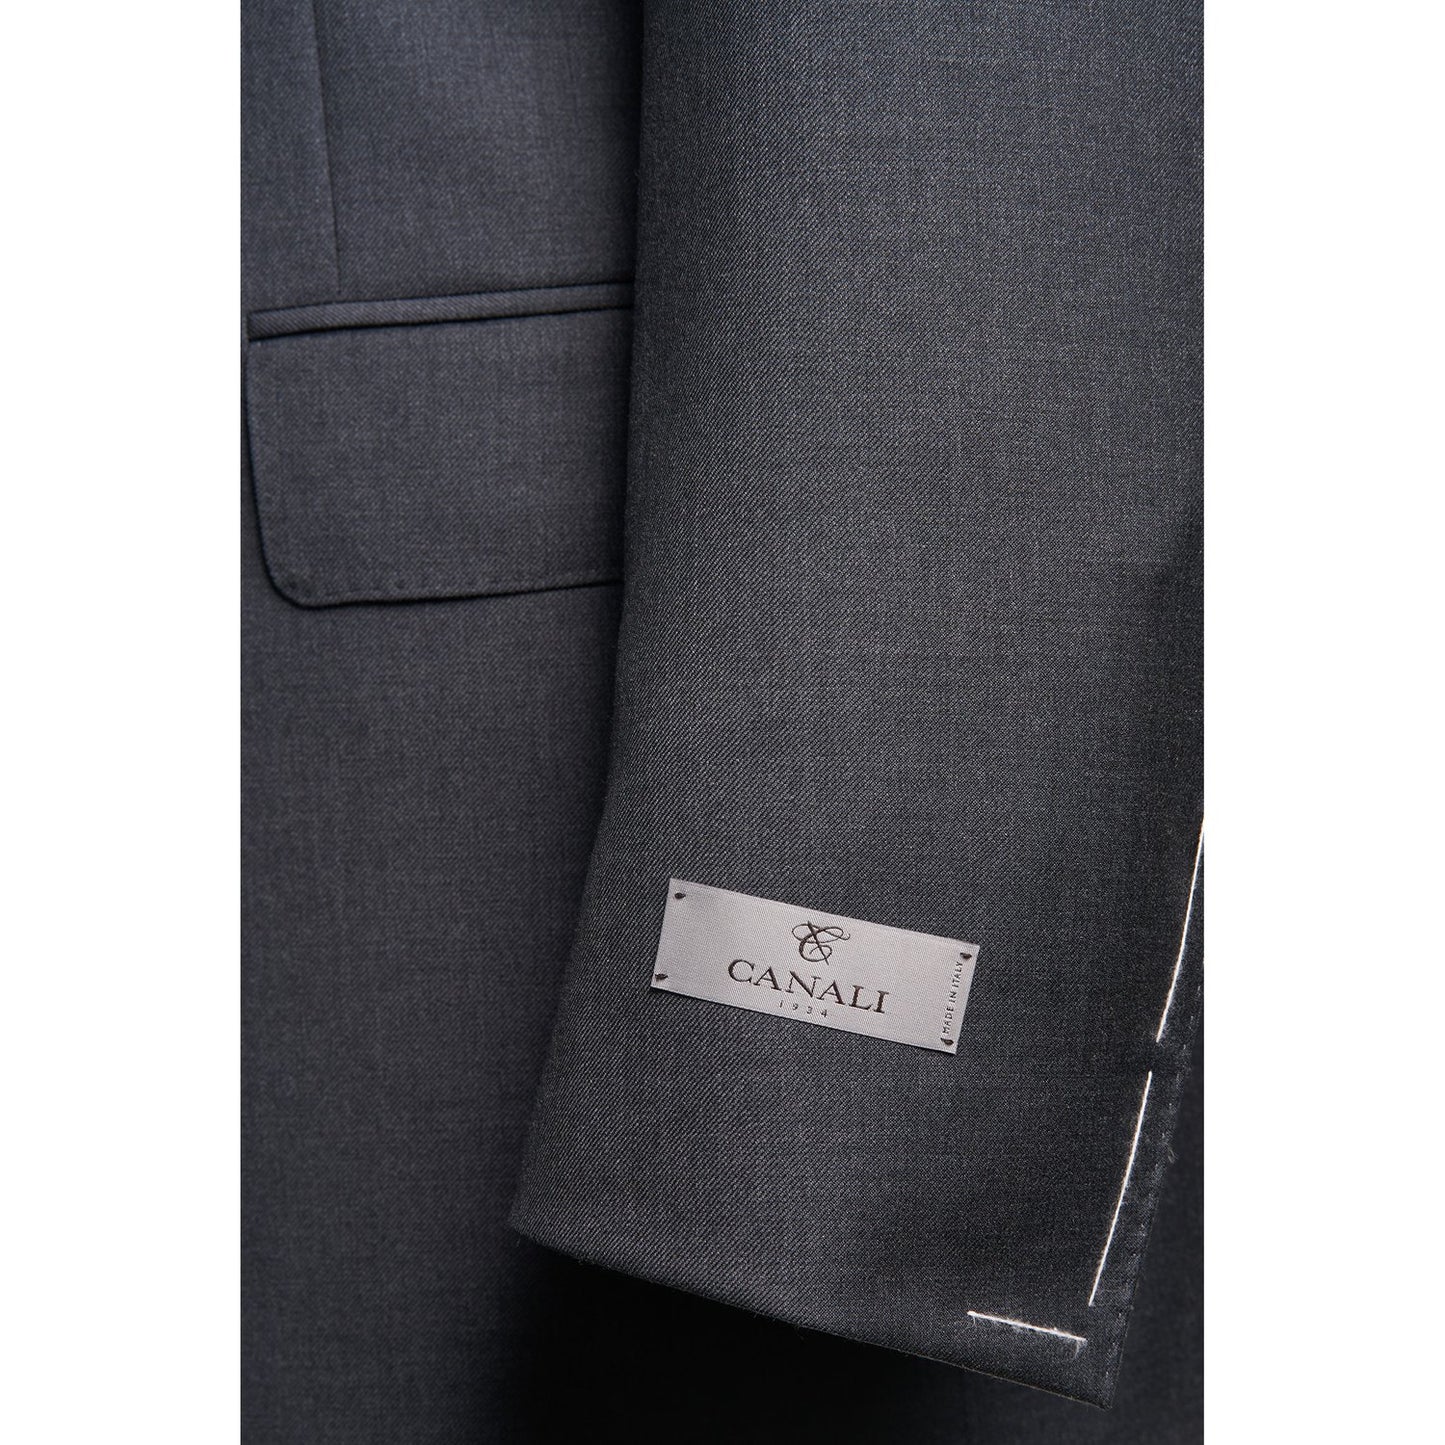 Canali Super 130 Contemporary Model Suit in Solid Gray